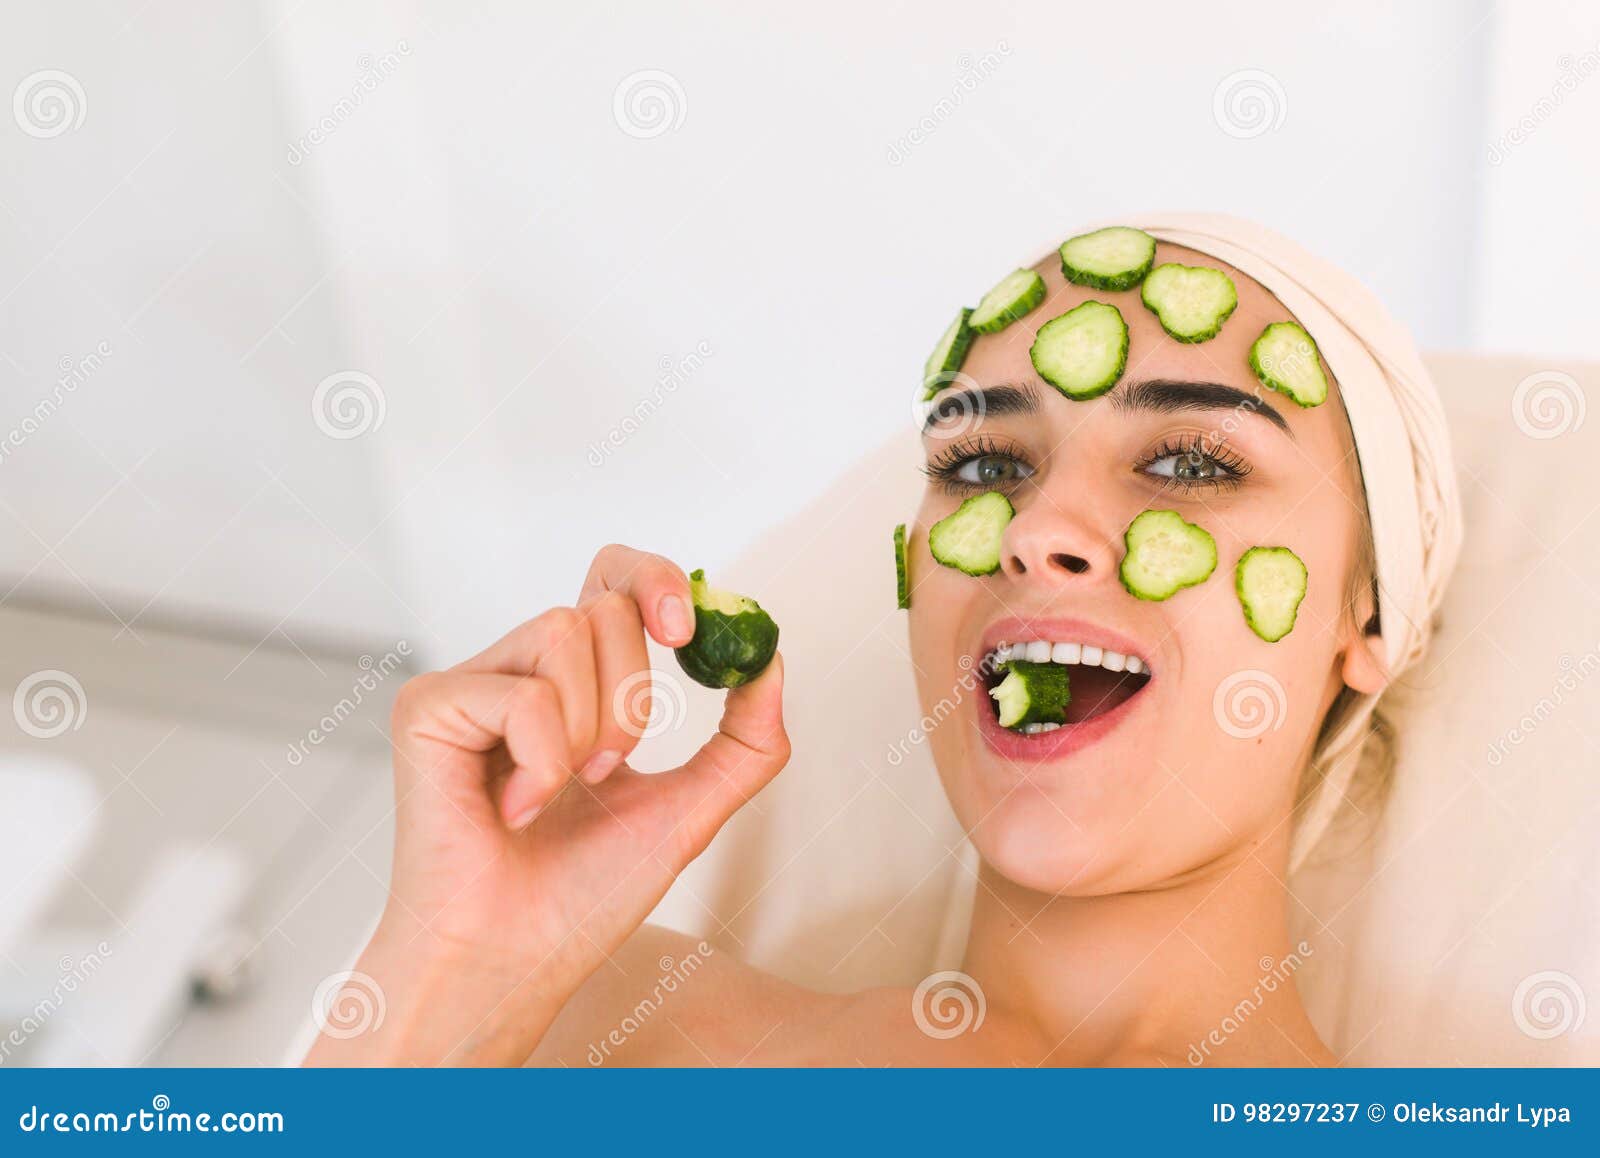 Girl Is Eating A Cucumber Stock Image Image Of Hand 98297237 